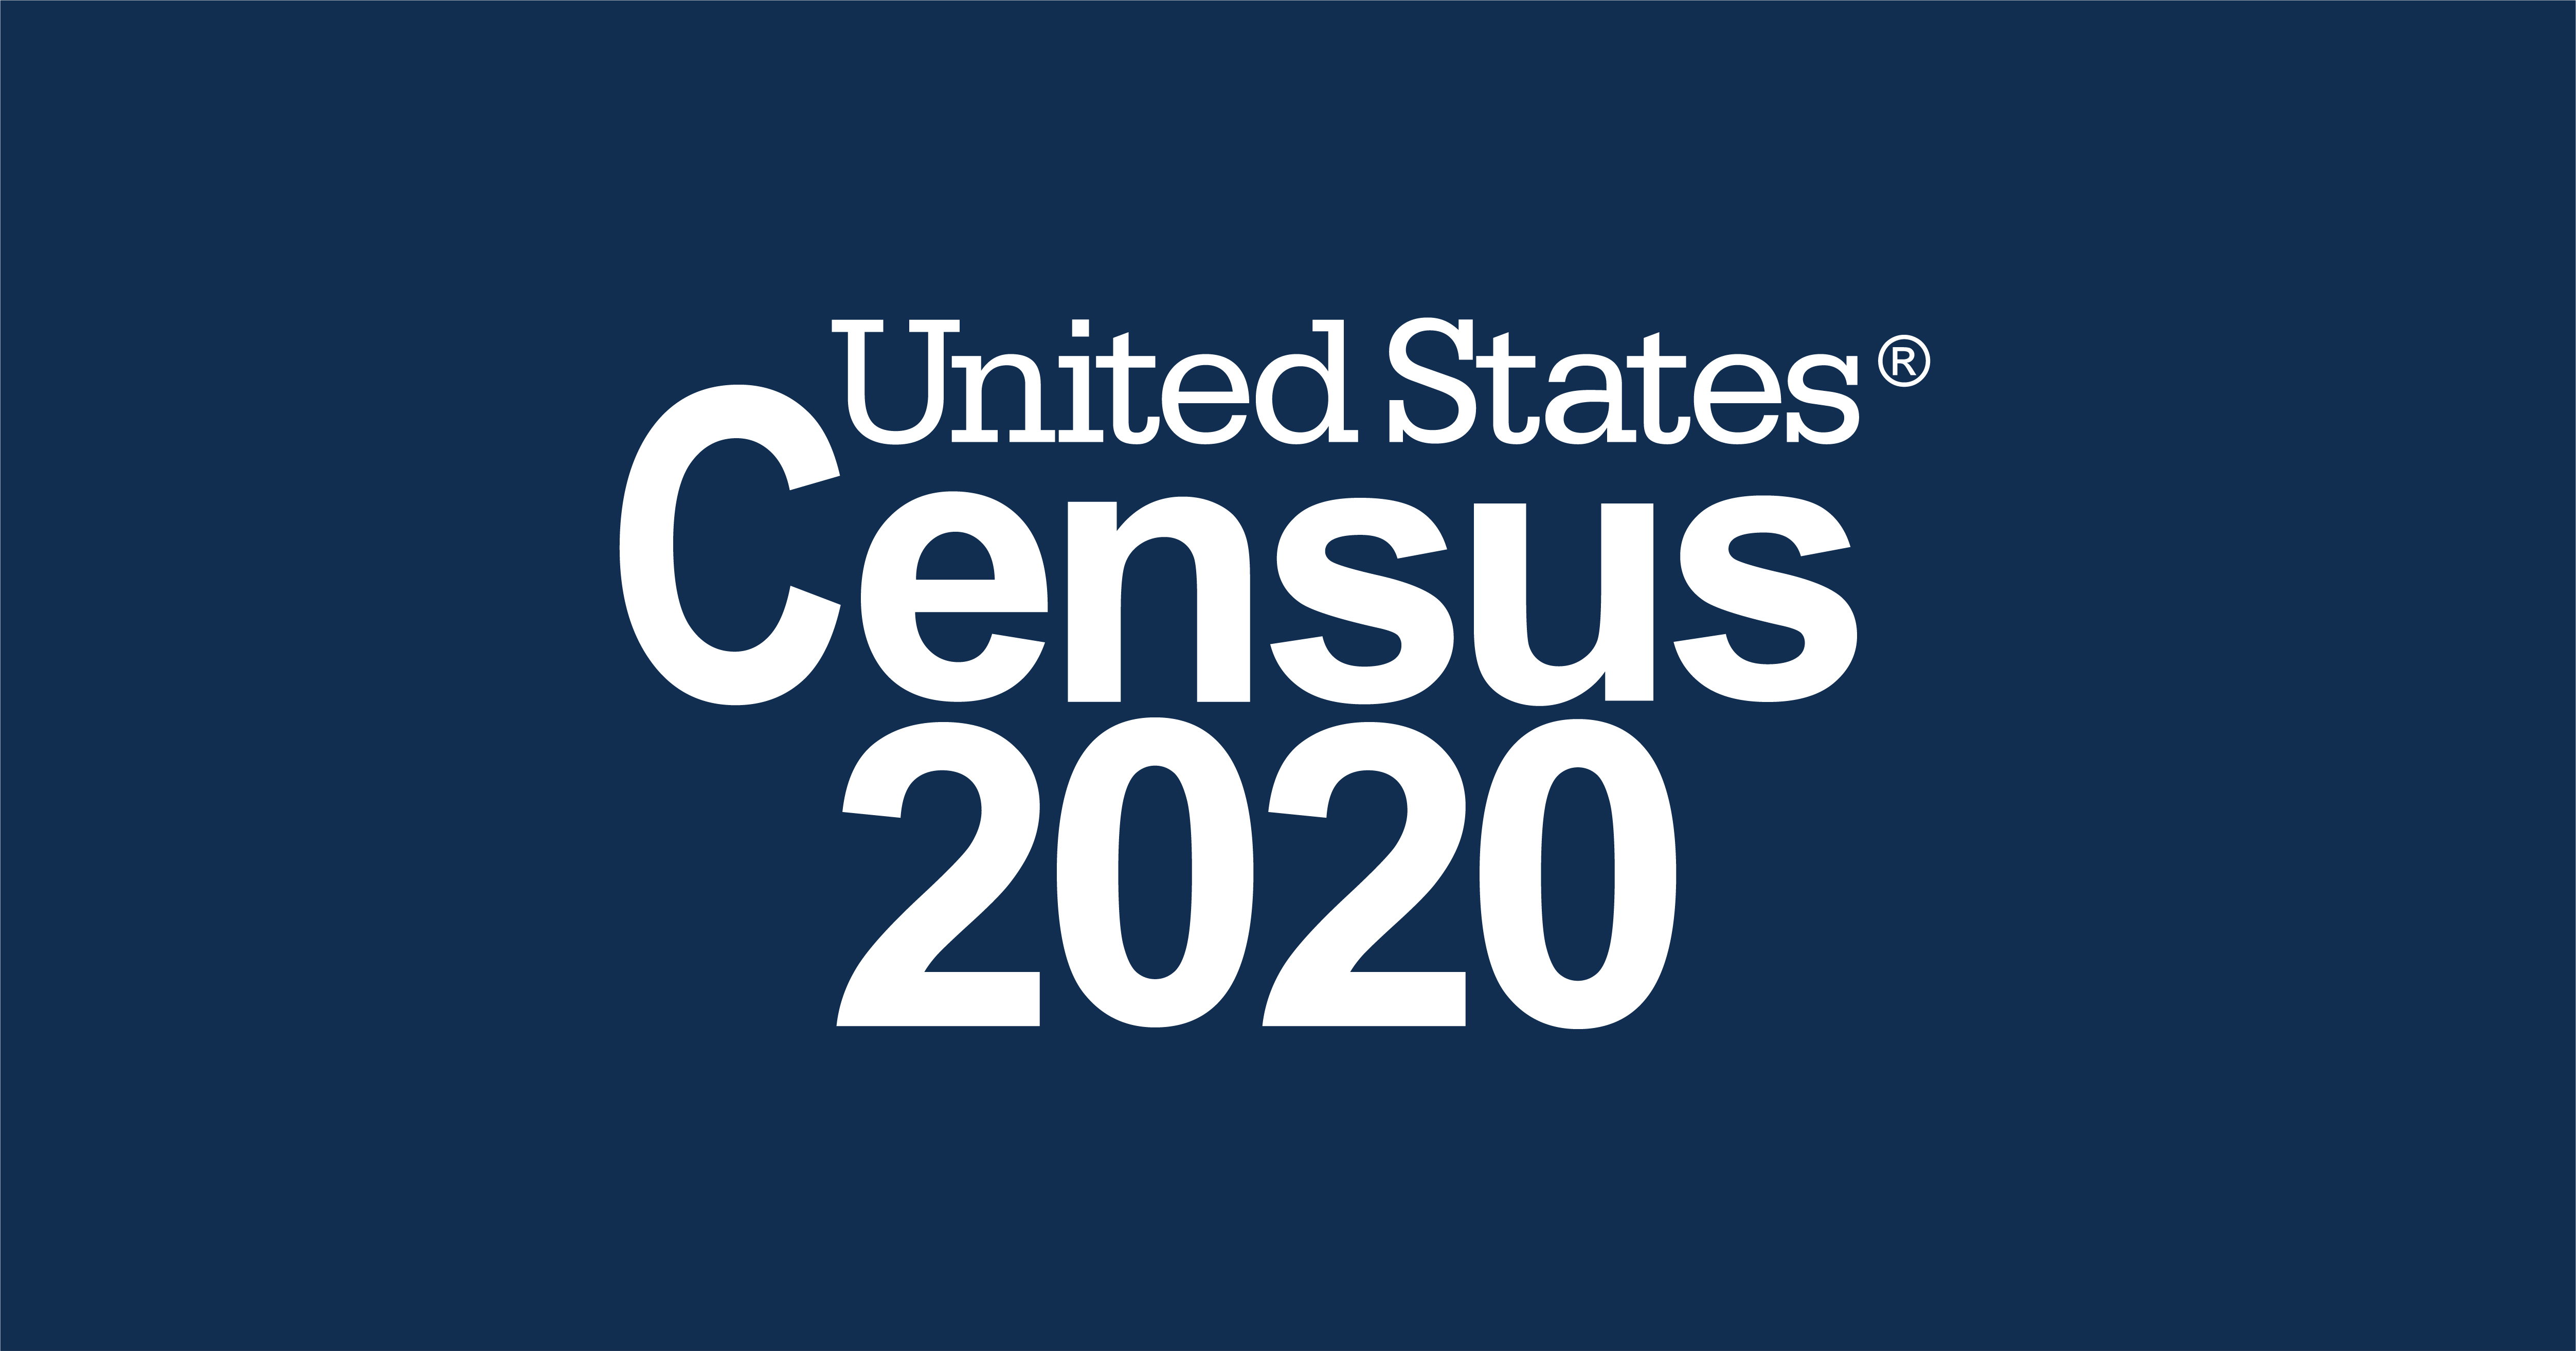 Census Bureau to Resume Some 2020 Census Field Operations in Select Locations